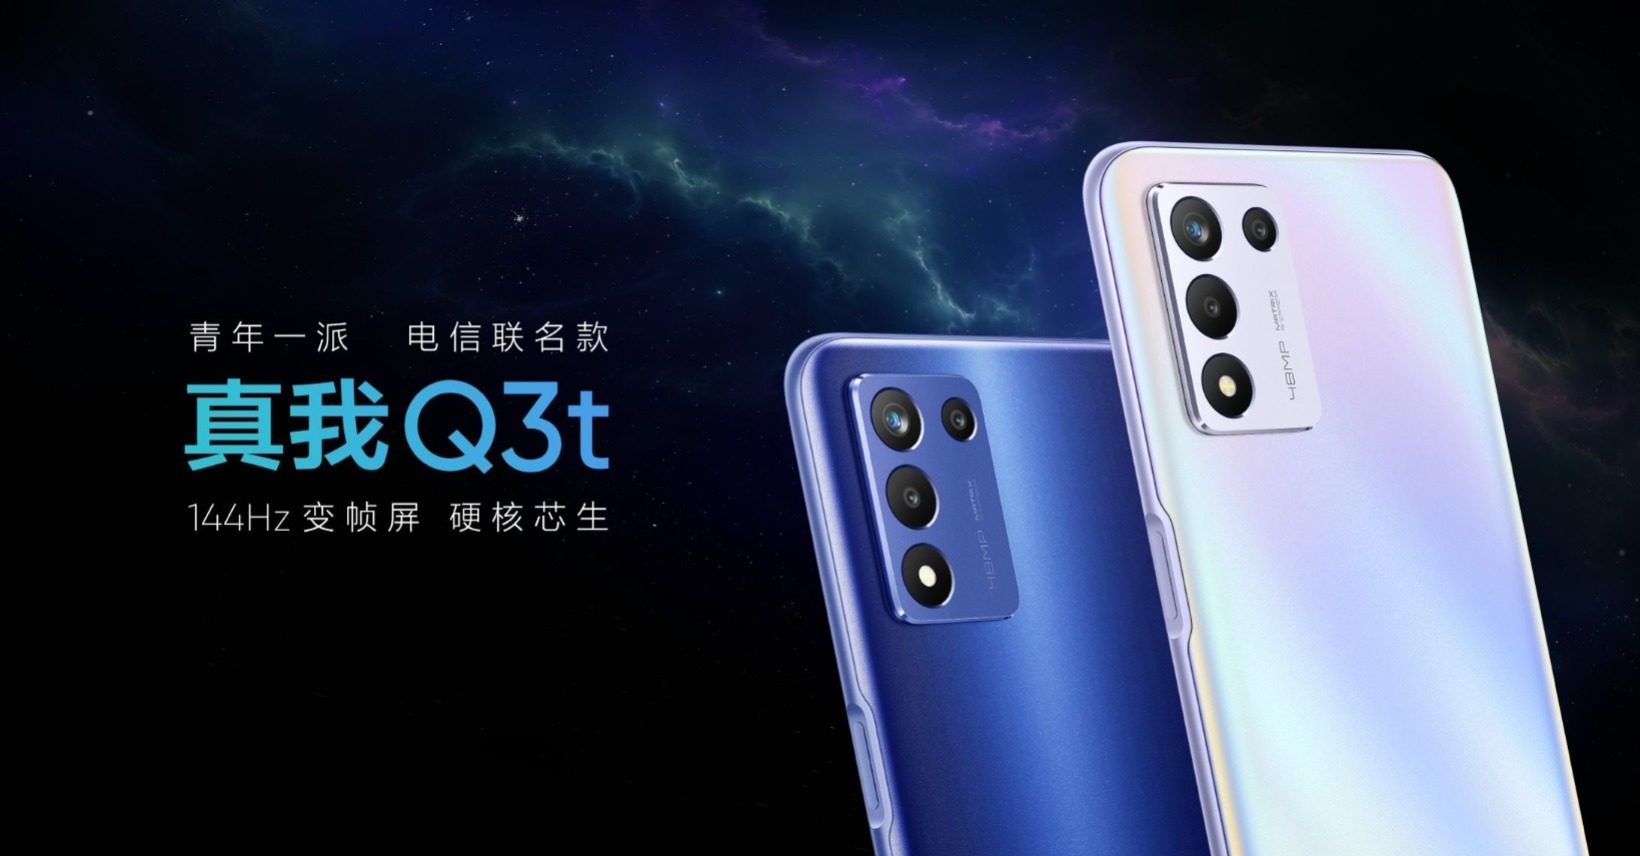 Realme Q3t 5G Featured Image